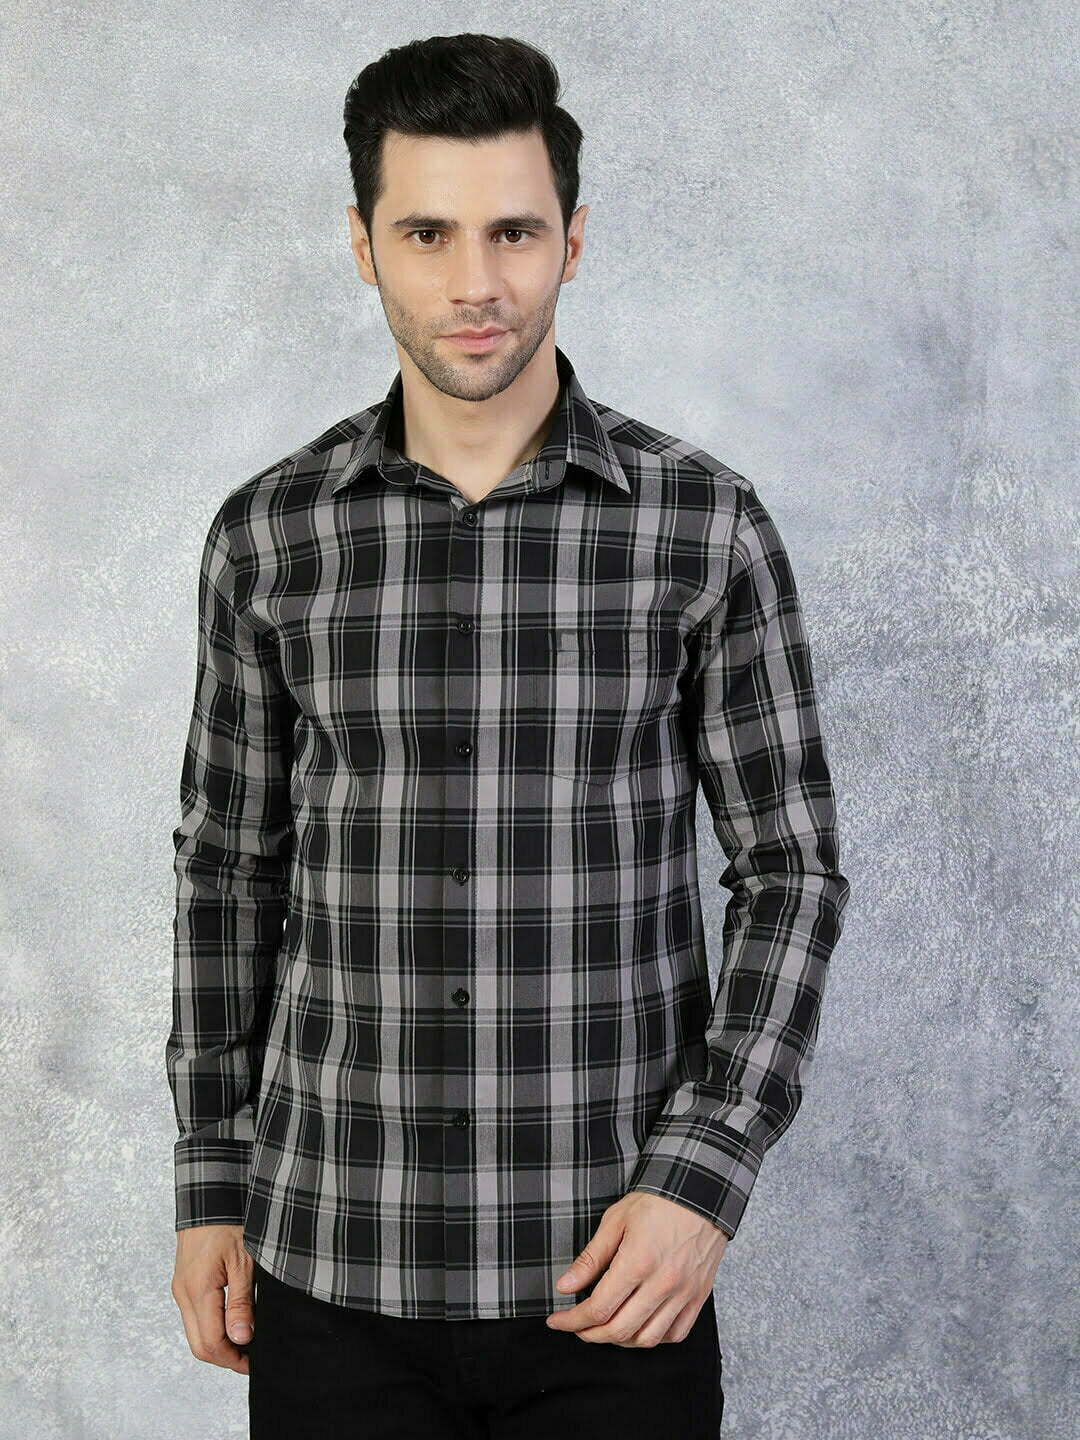 Buy Black And White Check Shirt - The Black Lover